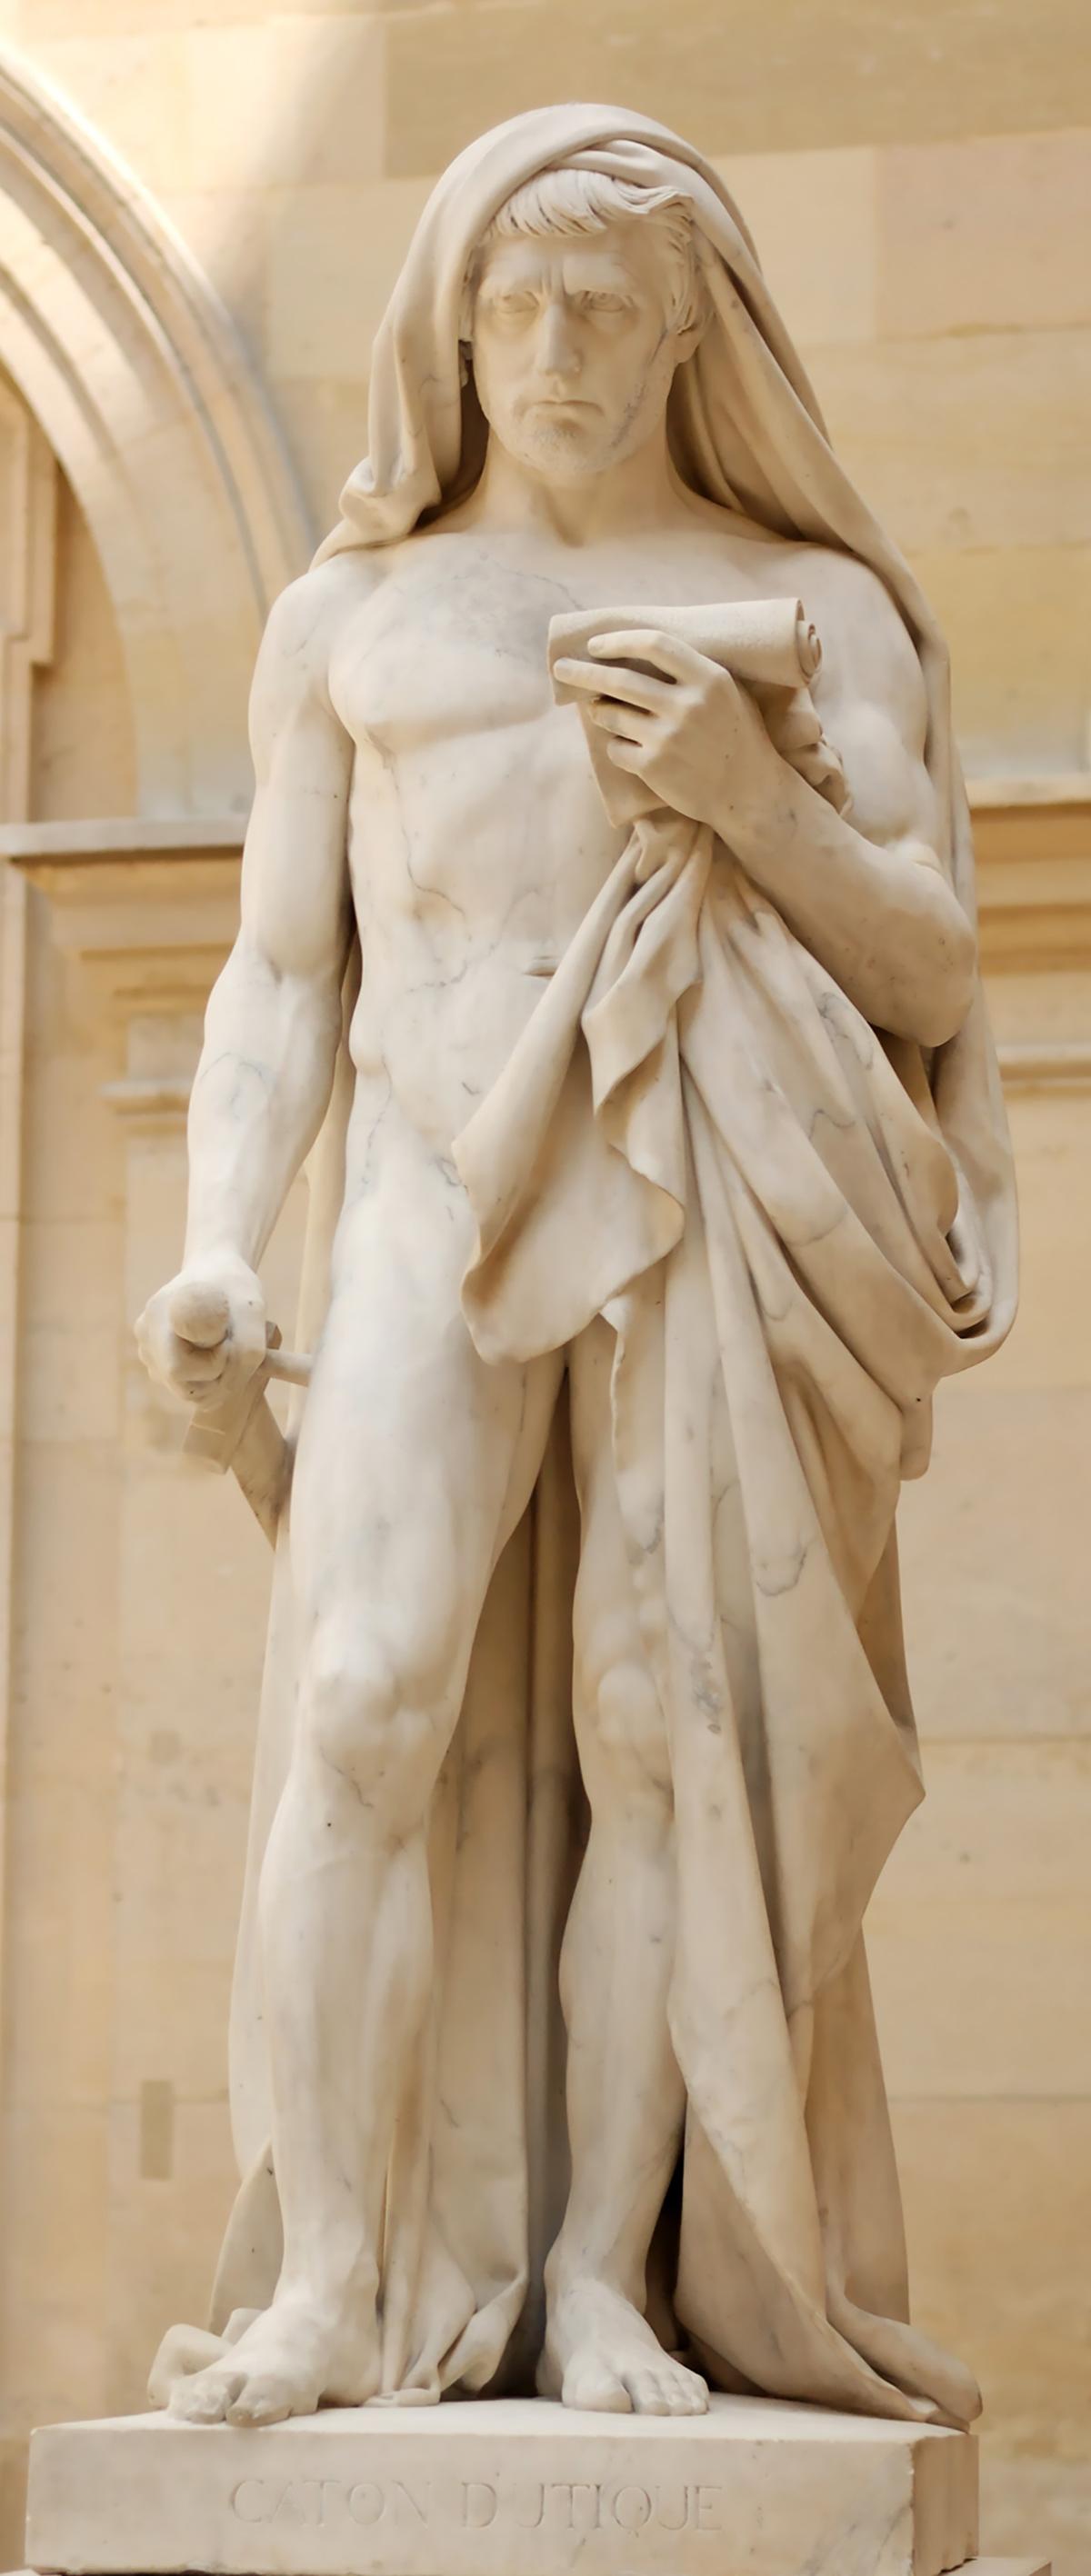 Statue of Cato reading the “Phaedo” (Plato’s dialogue recounting the last hours of Socrates's life) before committing suicide, 1840, by Jean-Baptiste Roman and François Rude. Carrara marble. Louvre Museum, Paris. (Public Domain)